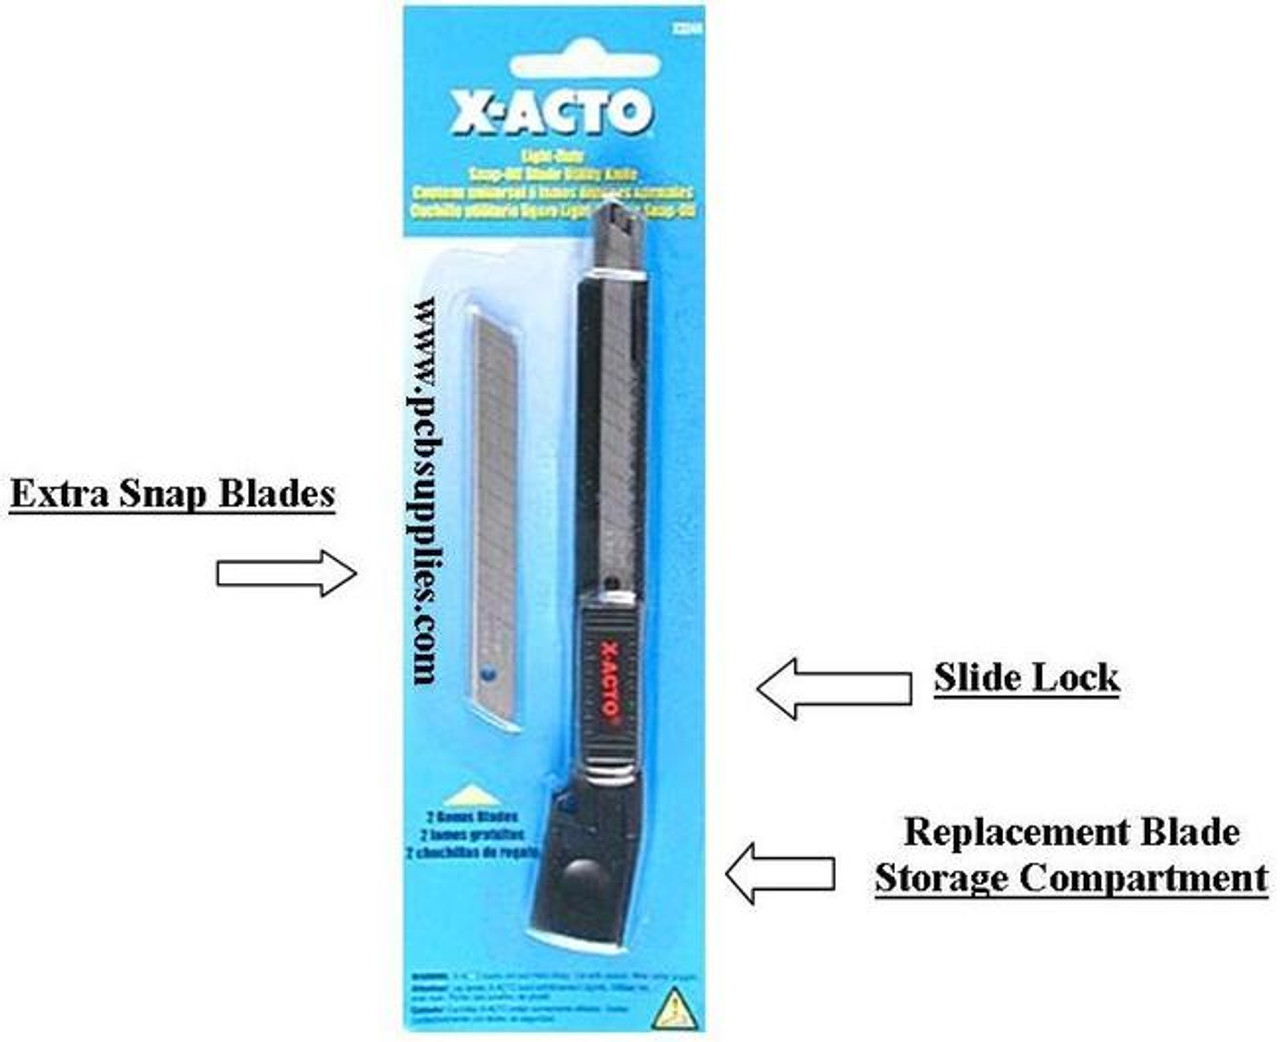 X-ACTO X3244, Utility Knife, Small Retractable, Box Cutter, w Blades